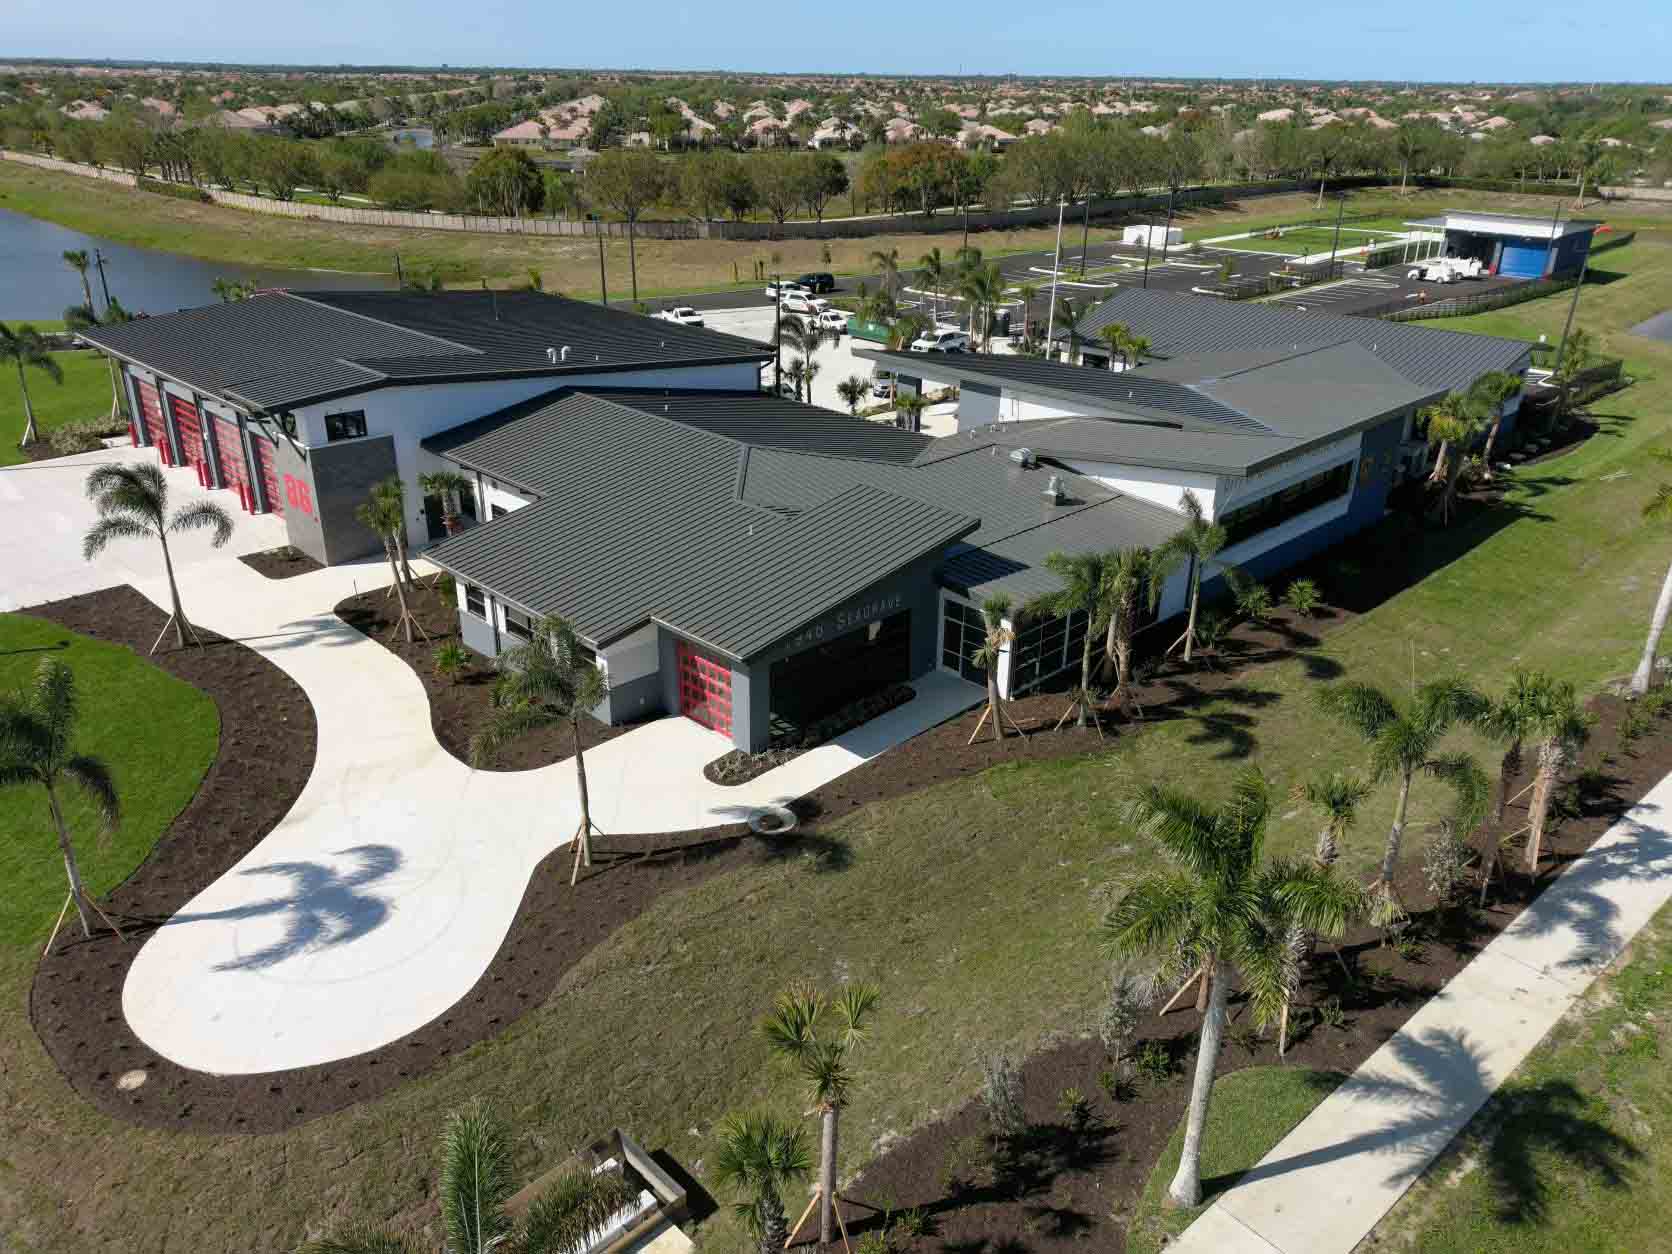 City of North Port Fire and Police Public Safety Building officially opens  in Wellen Park - Wellen Park